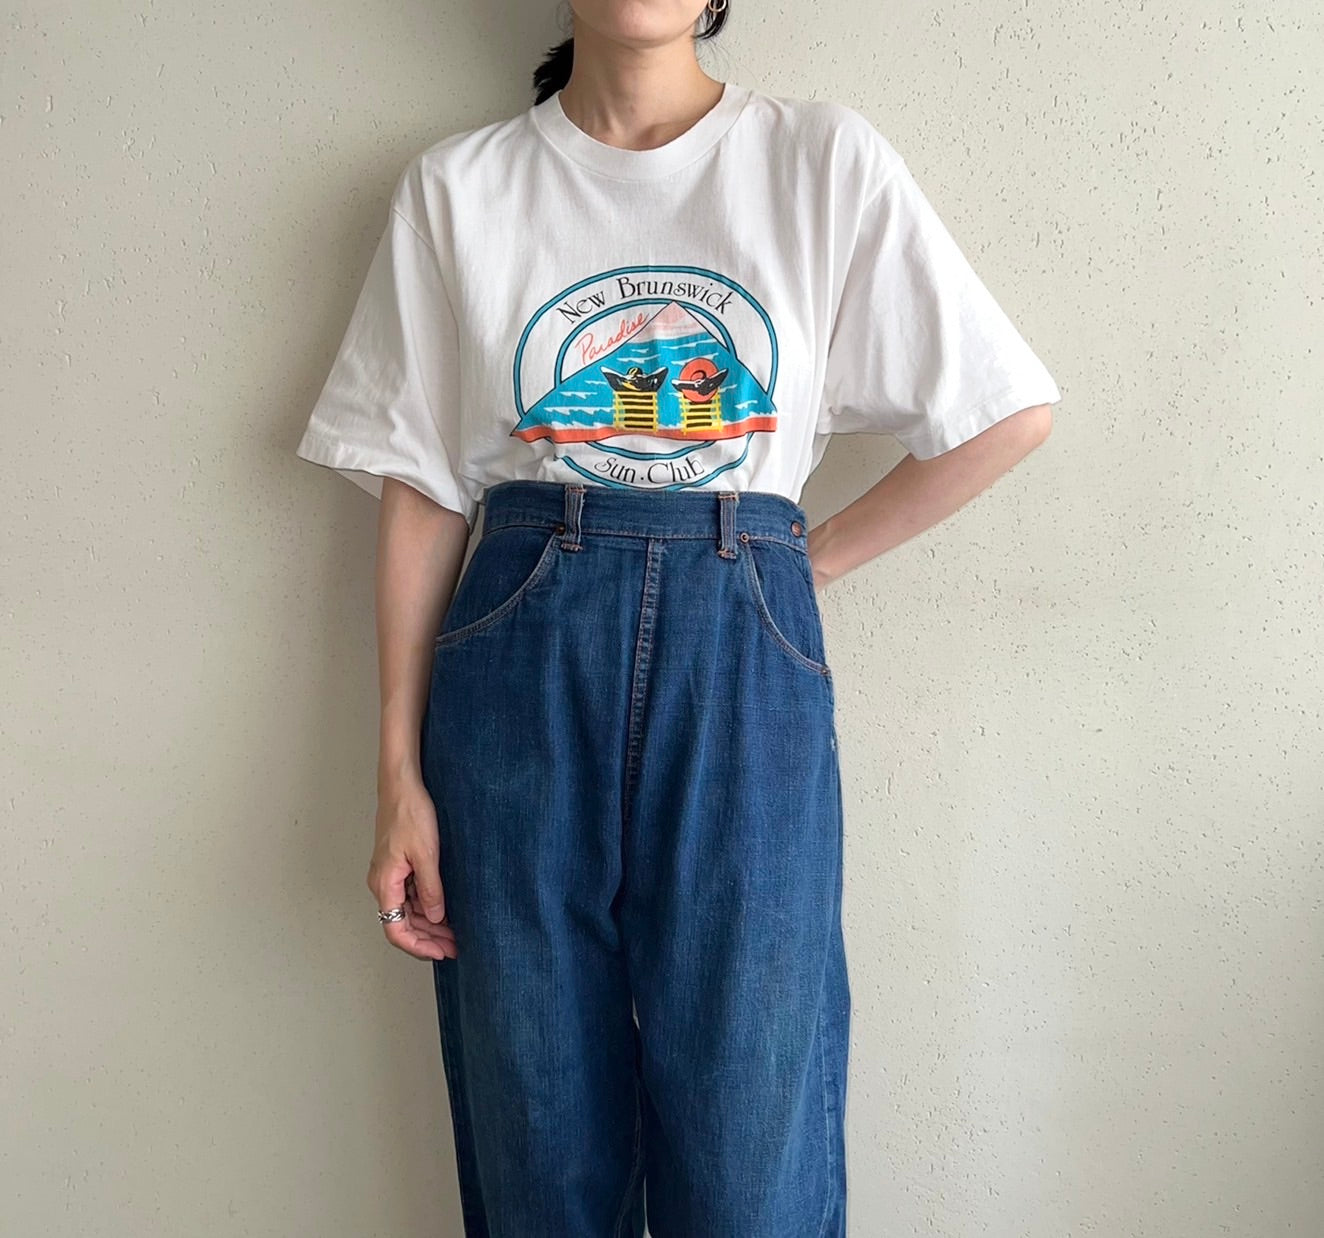 90s Printed T-shirt Made in Canada